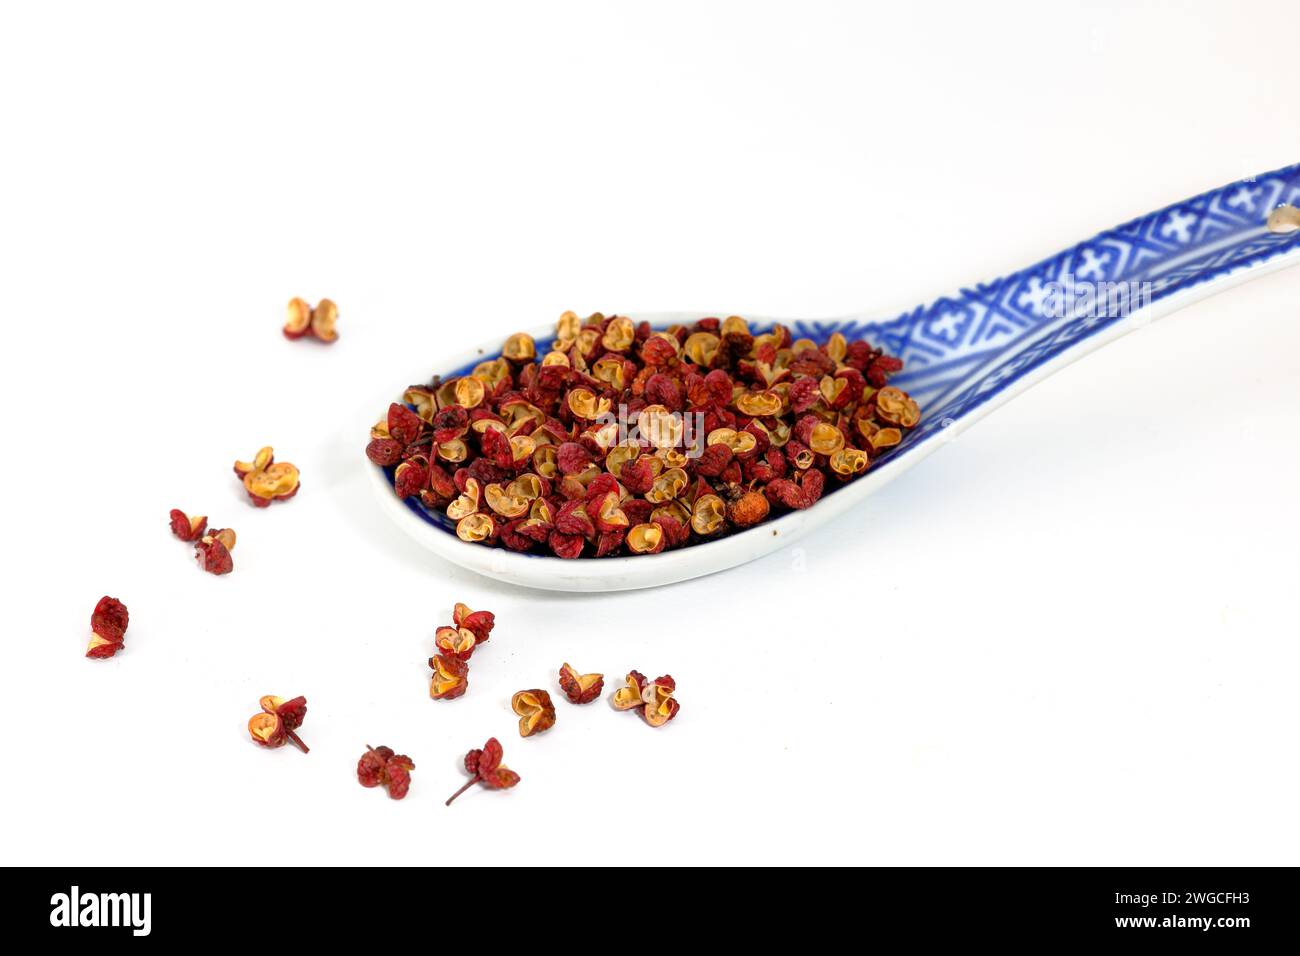 A soup spoon of dried Da Hong Pao Sichuan Peppercorns (Zanthoxylum bungeanum) 大紅袍 花椒 prickly ash berries isolated on a white background. Stock Photo